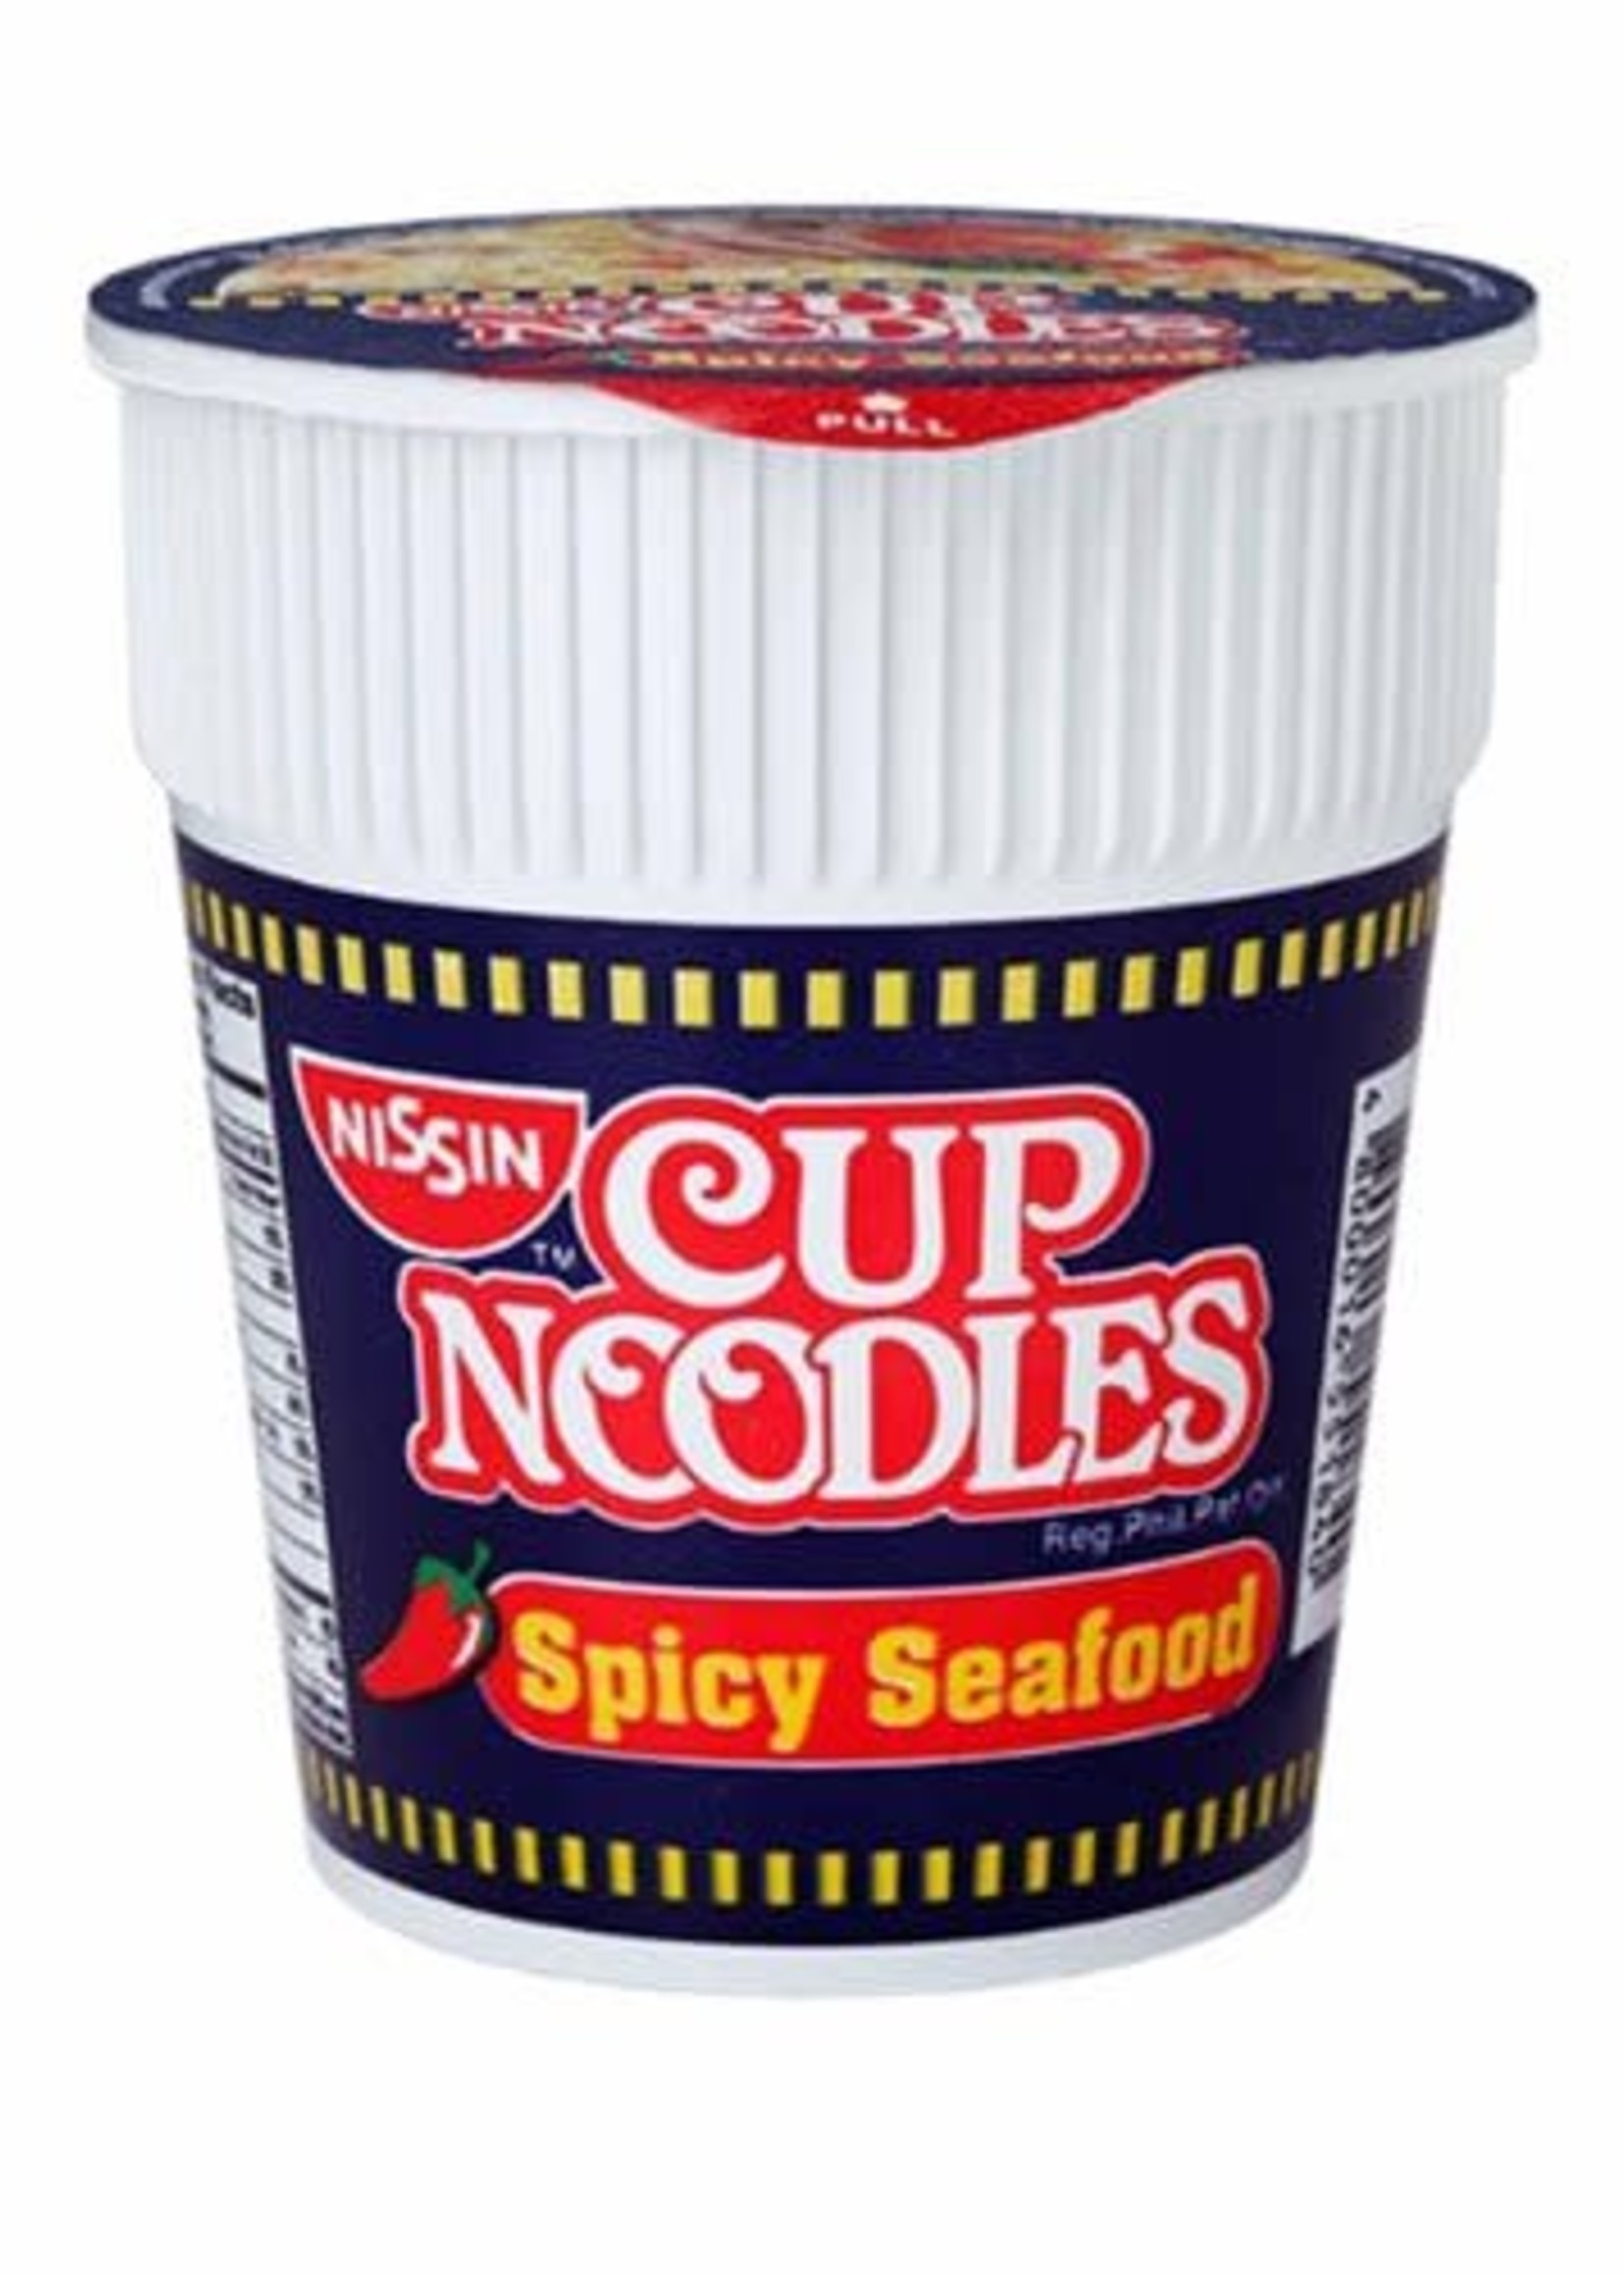 Nissin Nissin Cup Noodle Spicy Seafood 60g